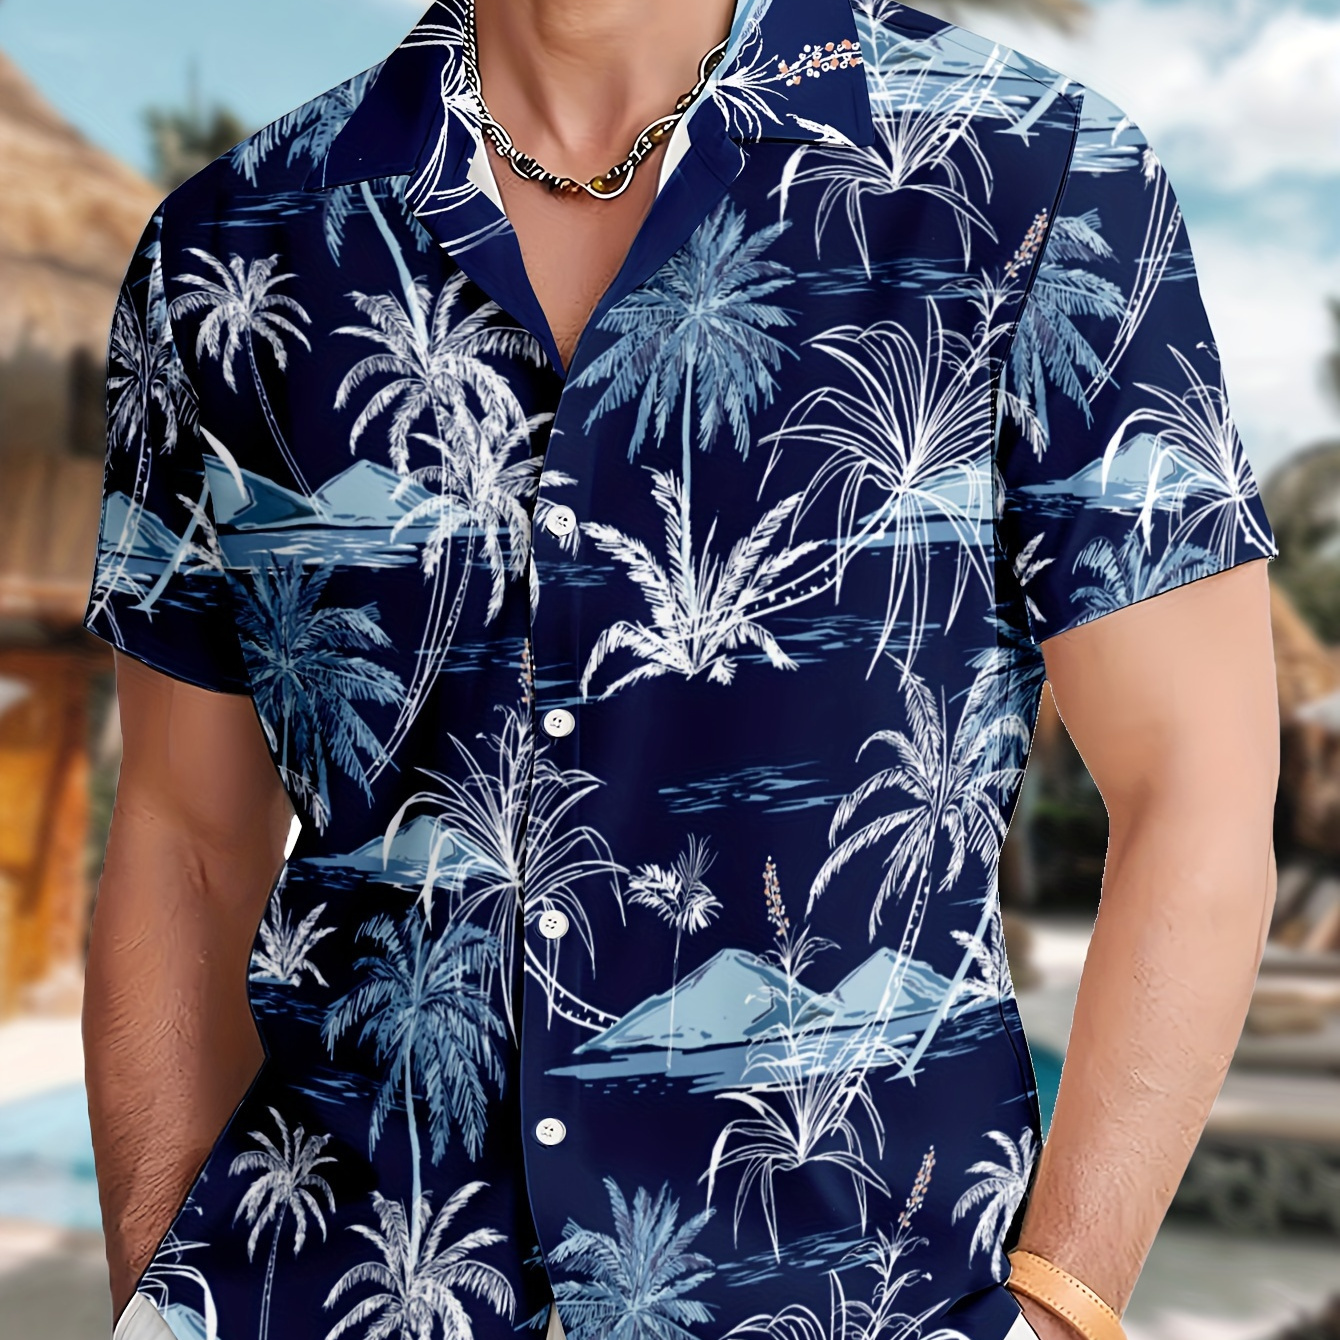 

Men's Trendy Hawaiian Lapel Collar Graphic Shirt With Stylish Palm Tree Print For Summer Beach, Pool And Resort, Comfort Fit